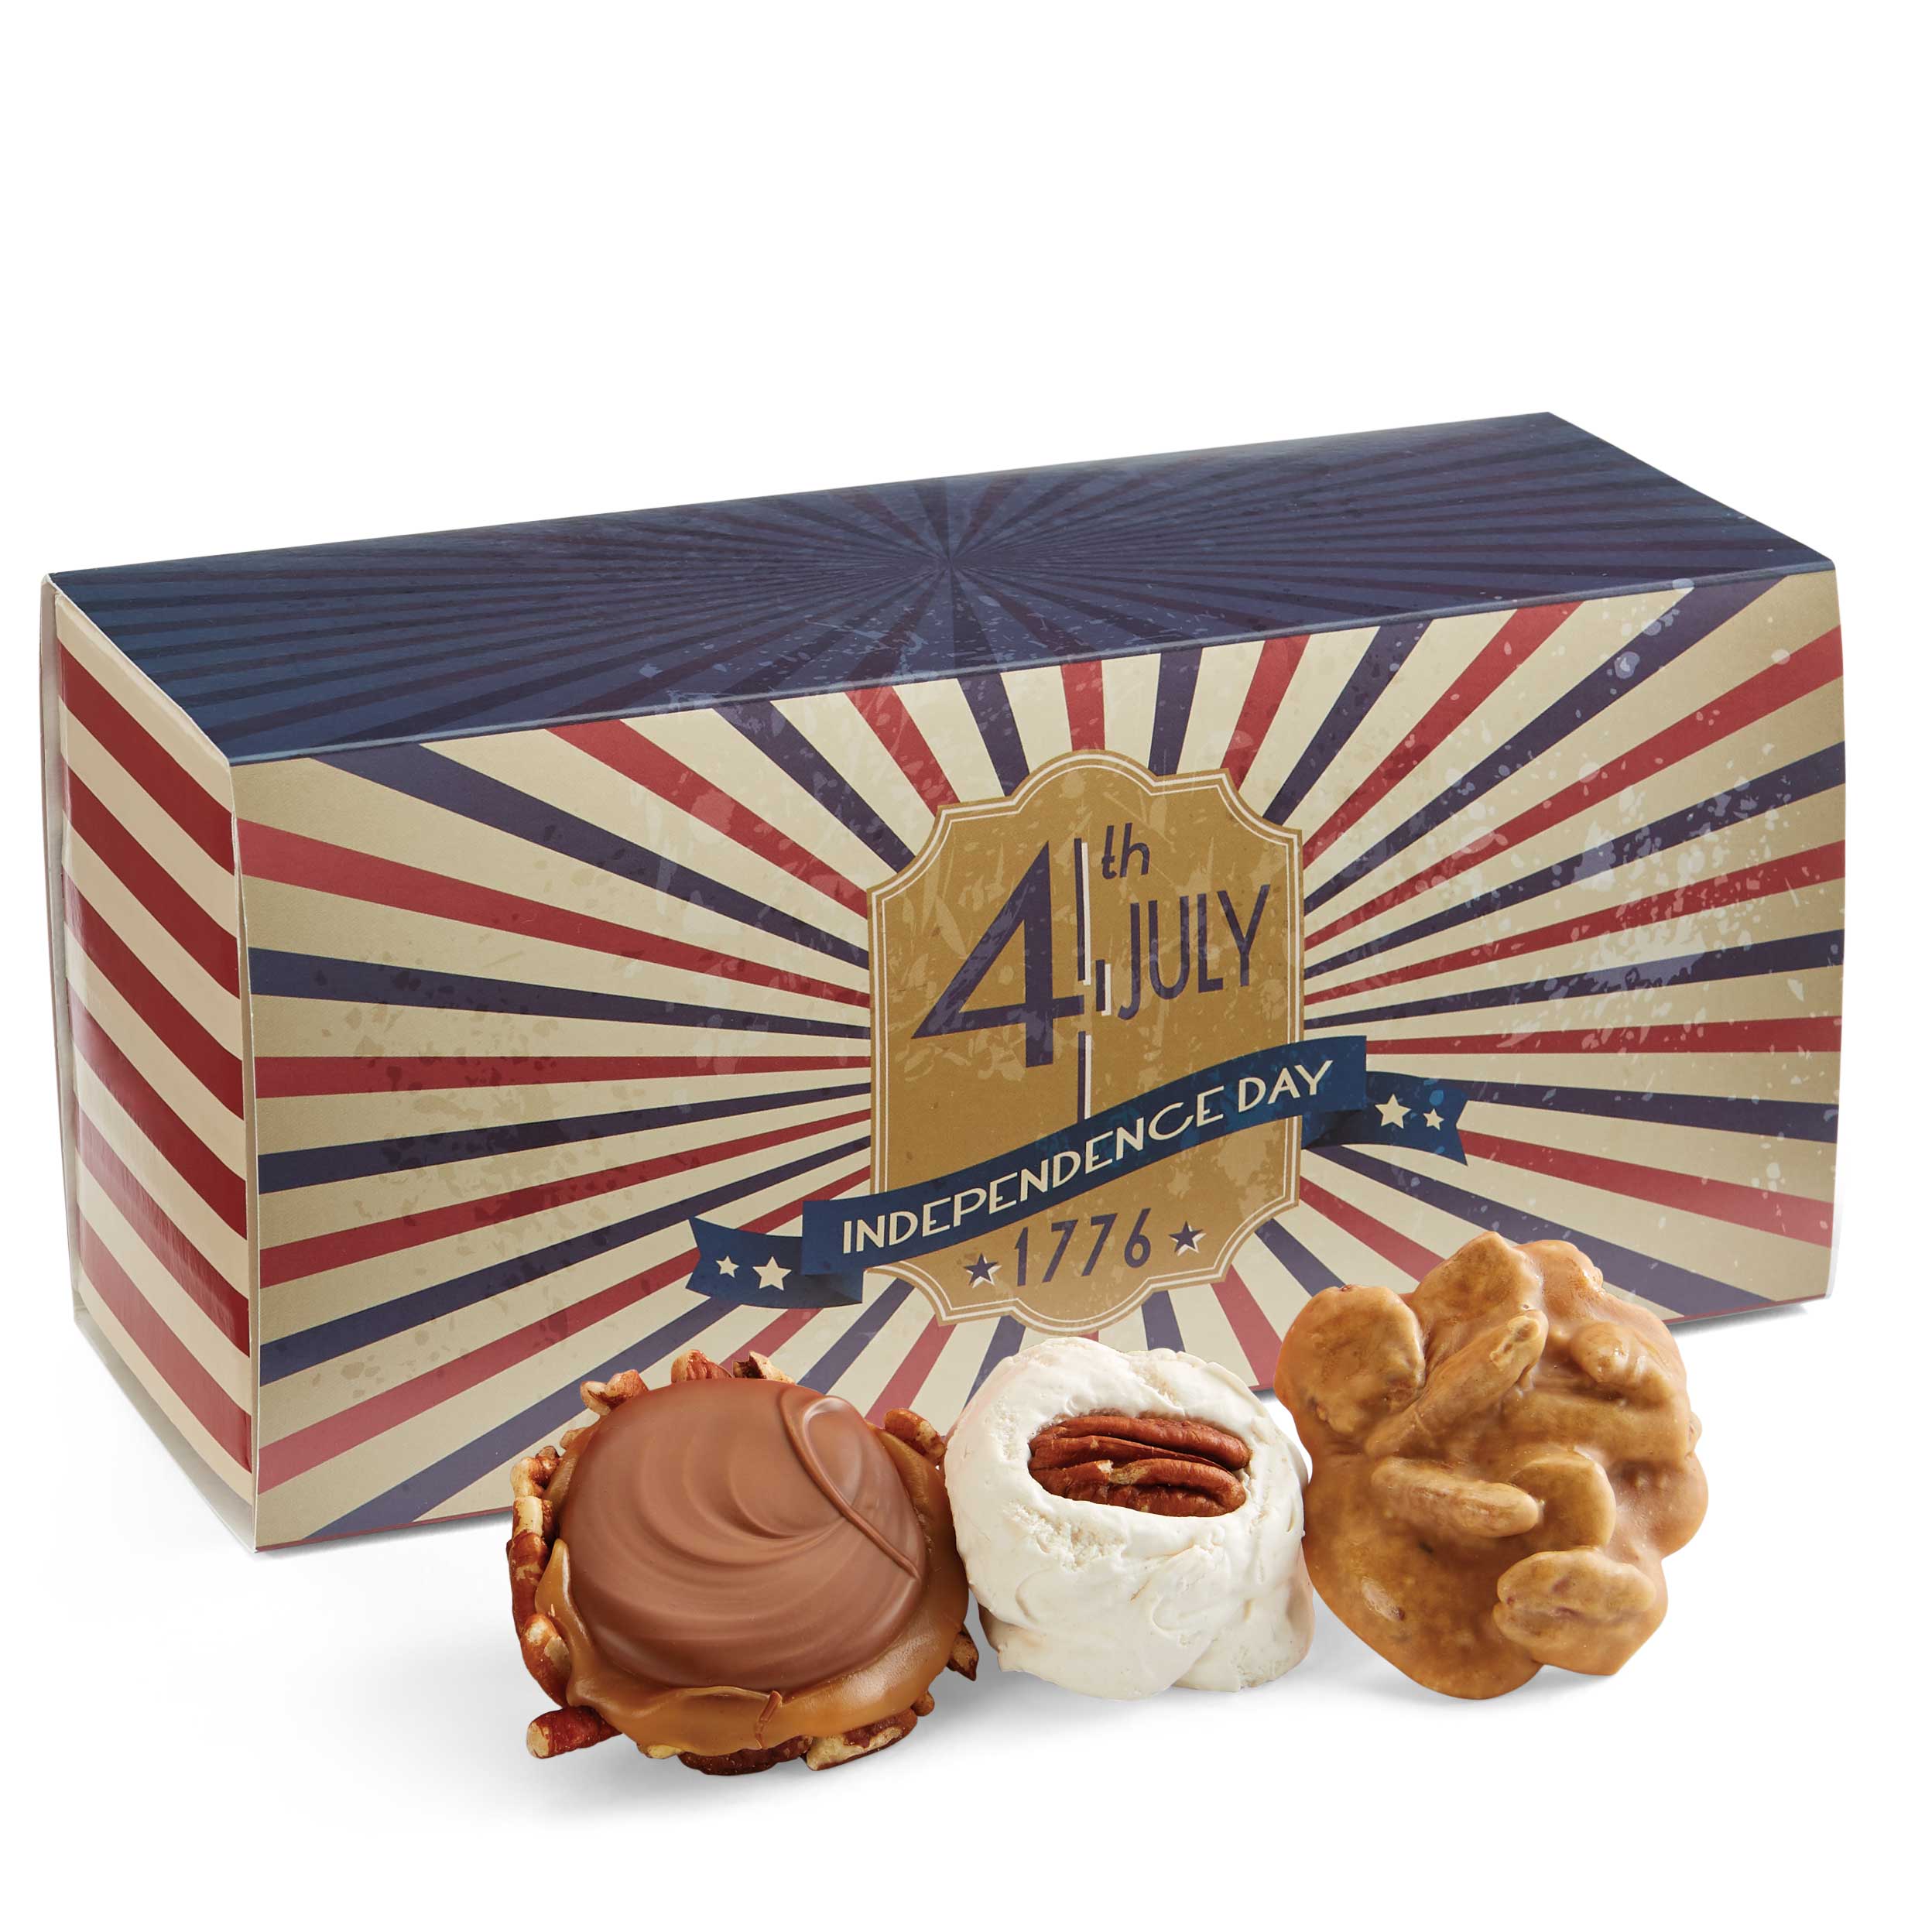 12 Piece Best Sellers Trio in the 4th of July Gift Box